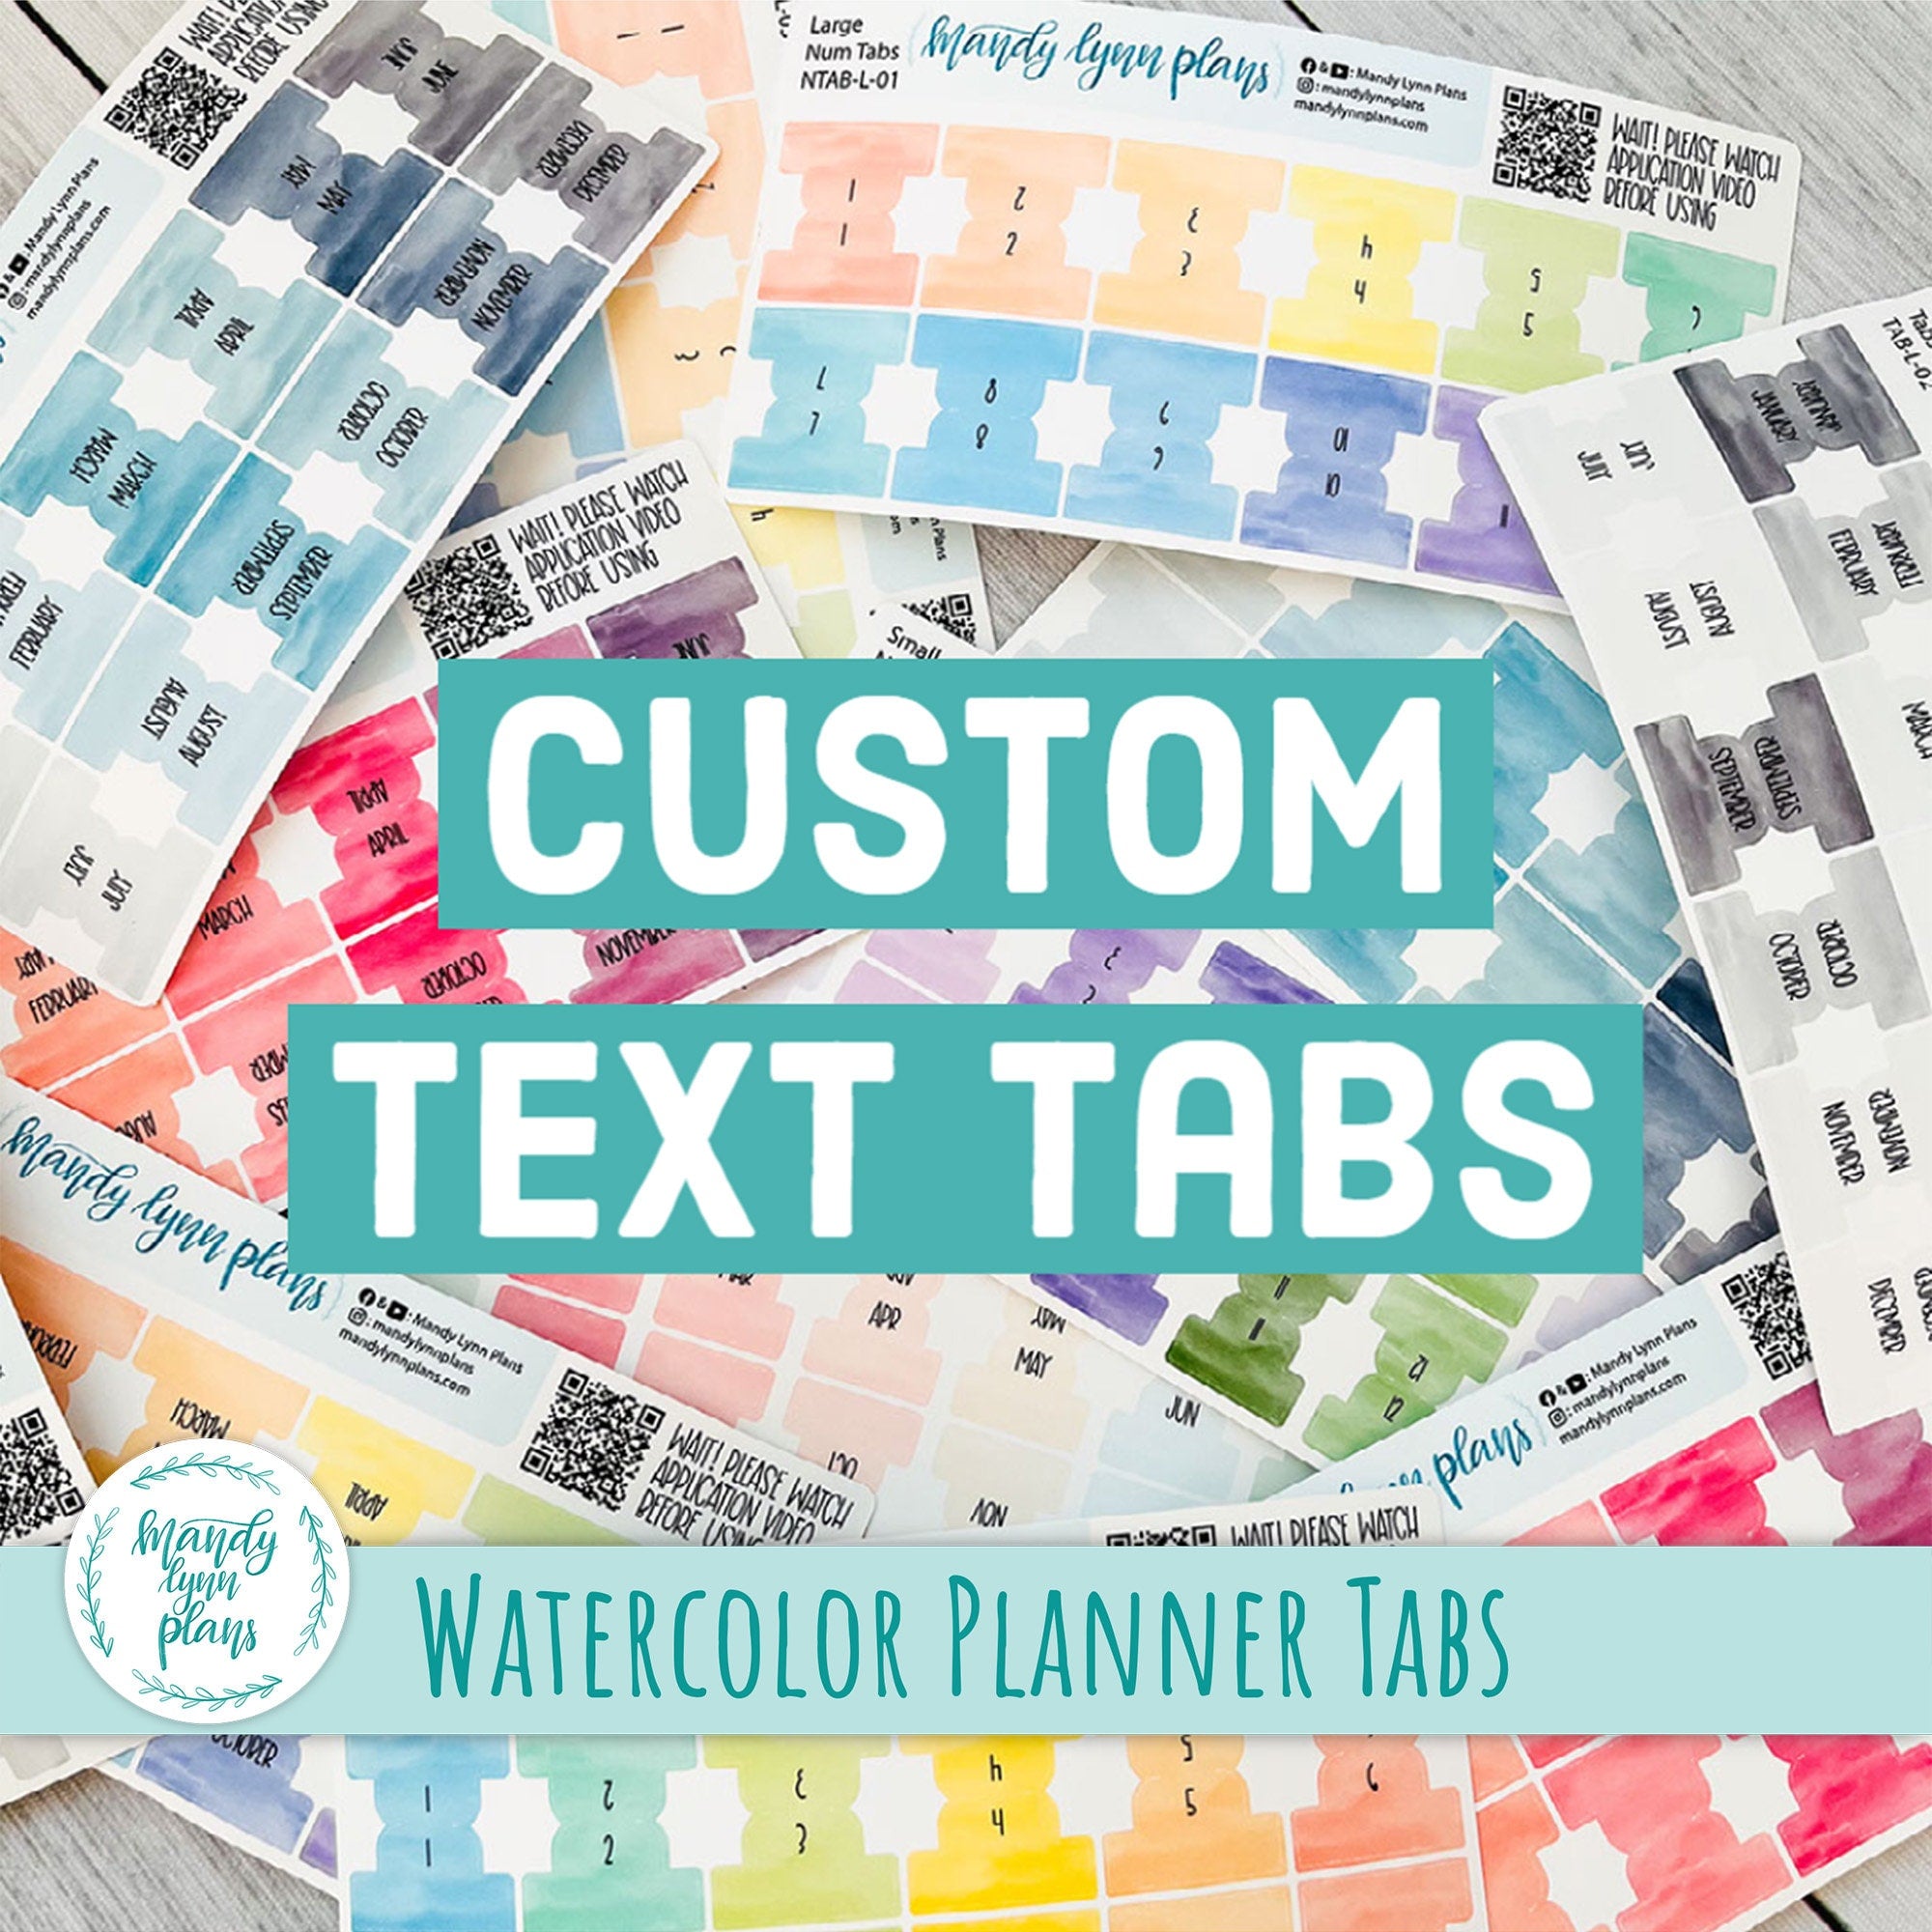 Bible tabs chapter names printed on vellum and coded with washi tape